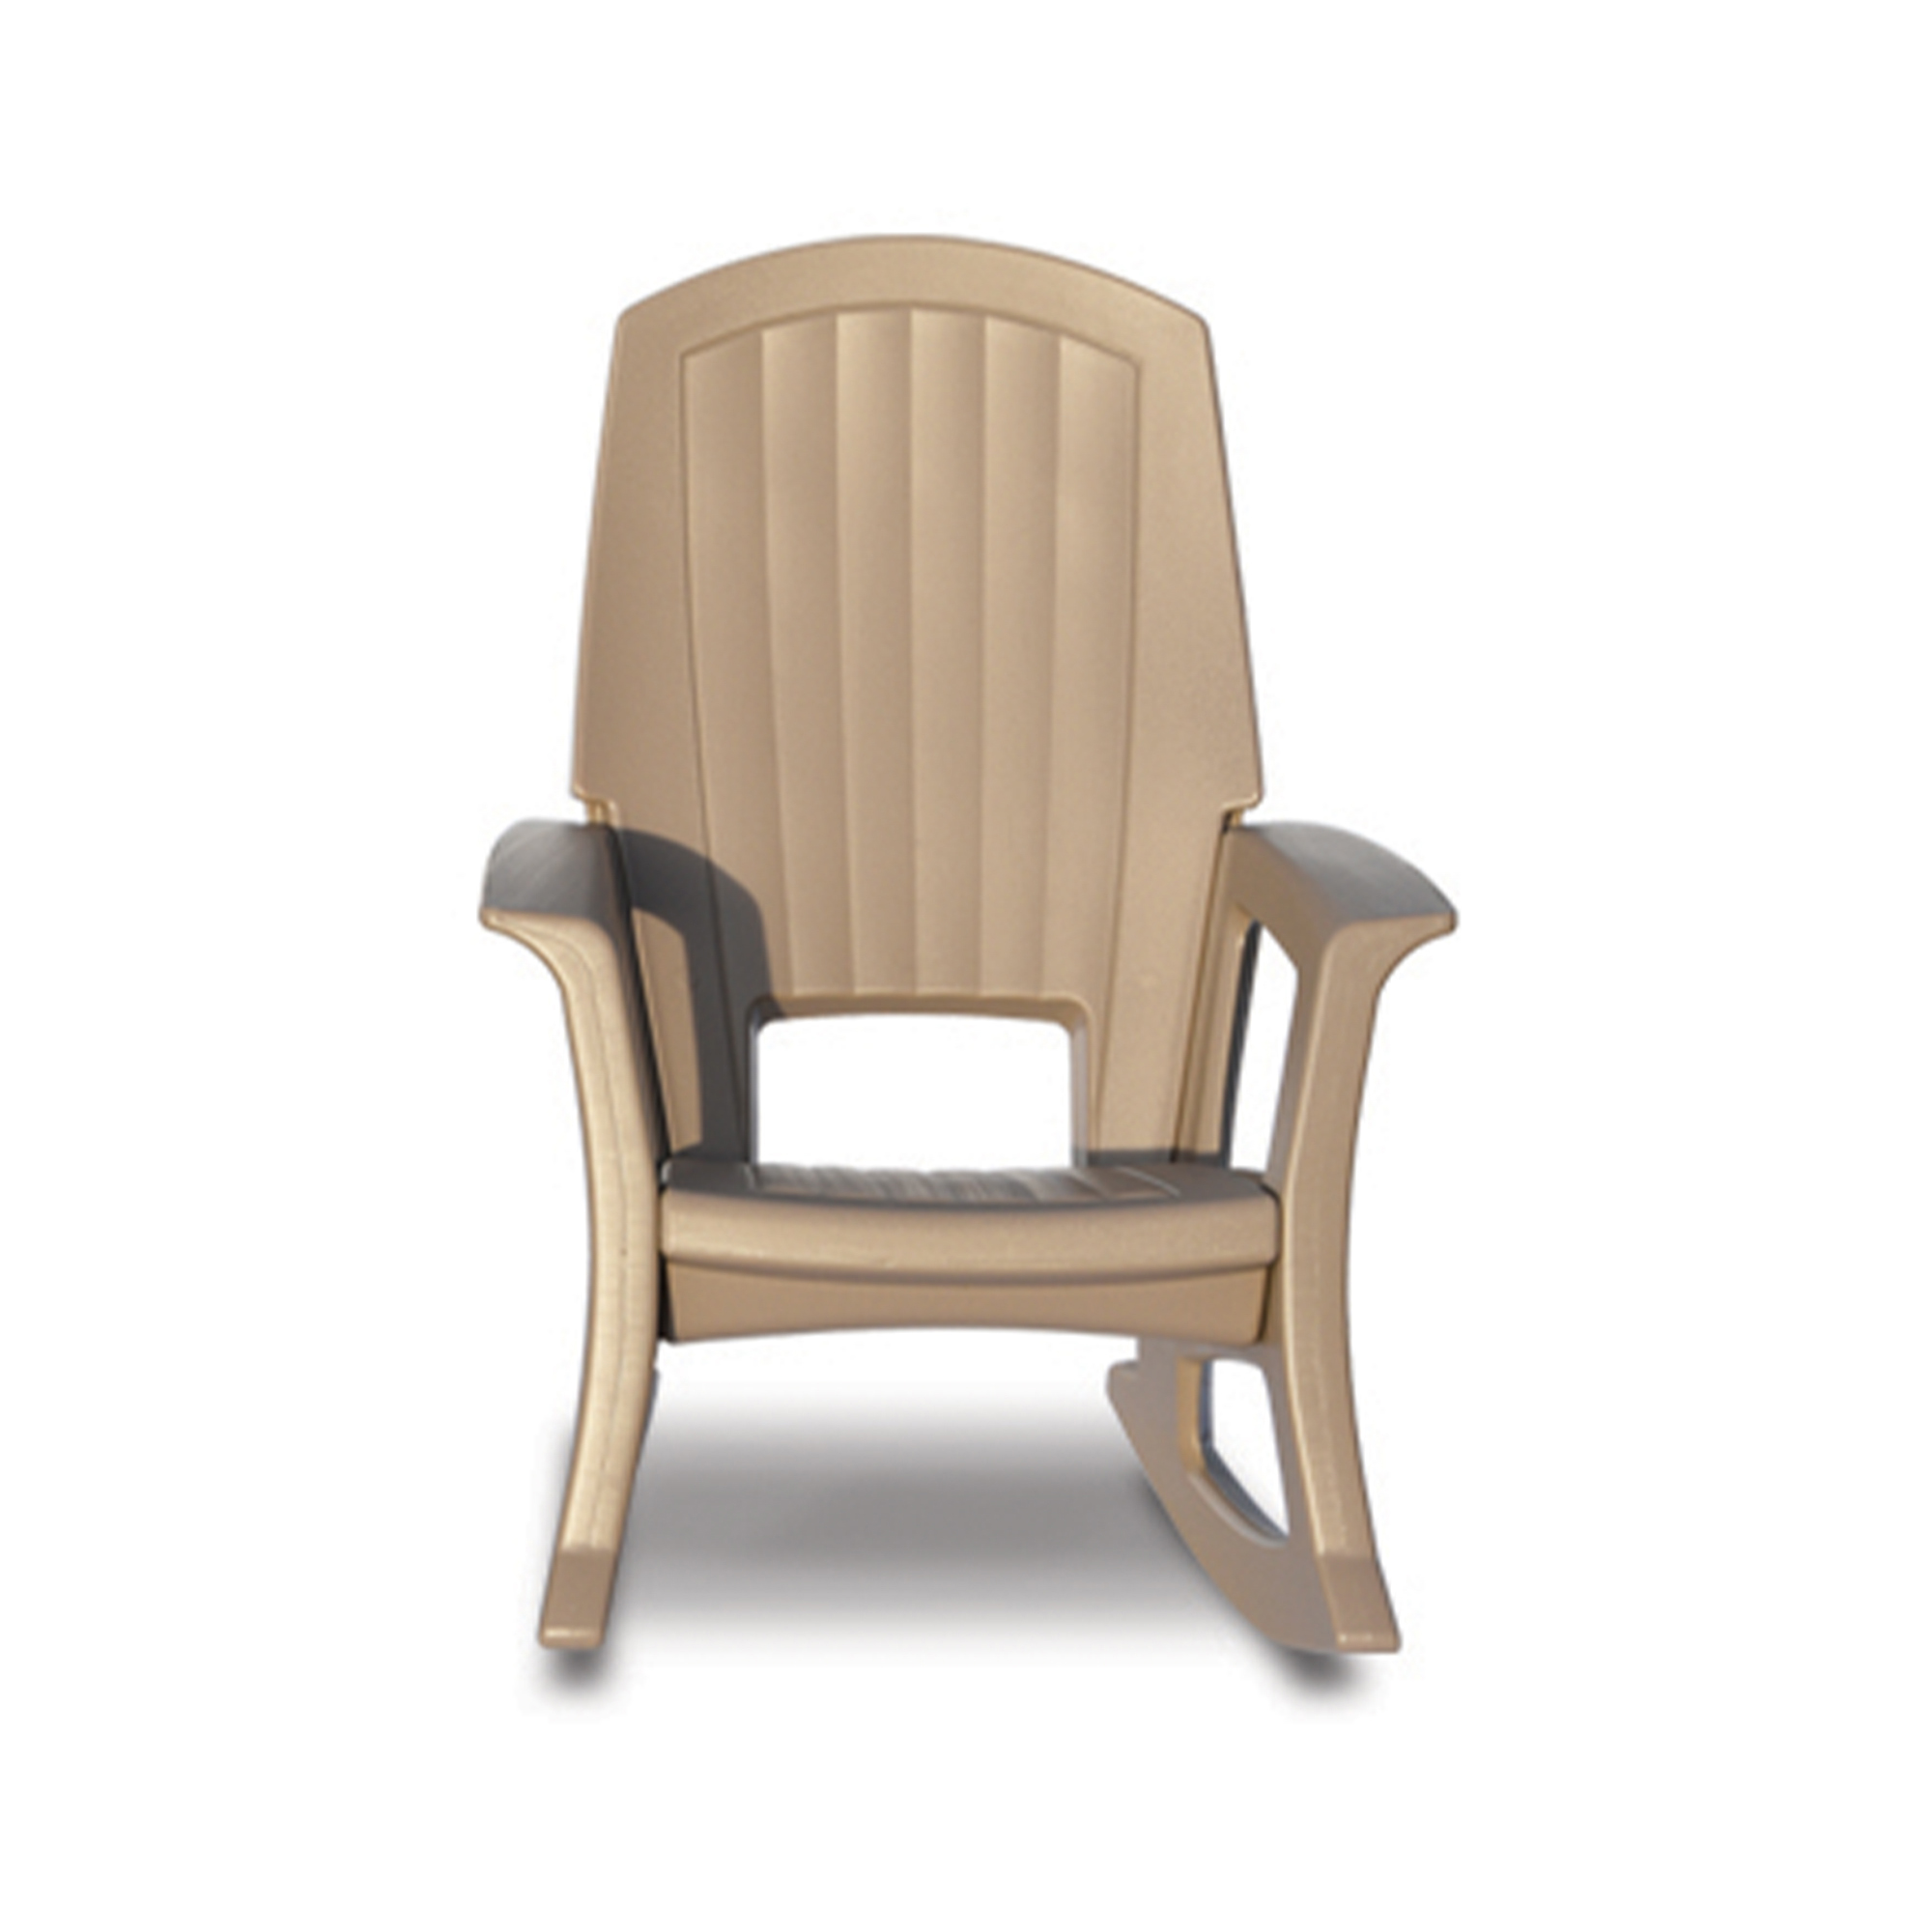 Semco Plastics Rockaway Heavy Duty Resin Outdoor Rocking Chair All-Weather Porch Rocker, Taupe - image 1 of 11